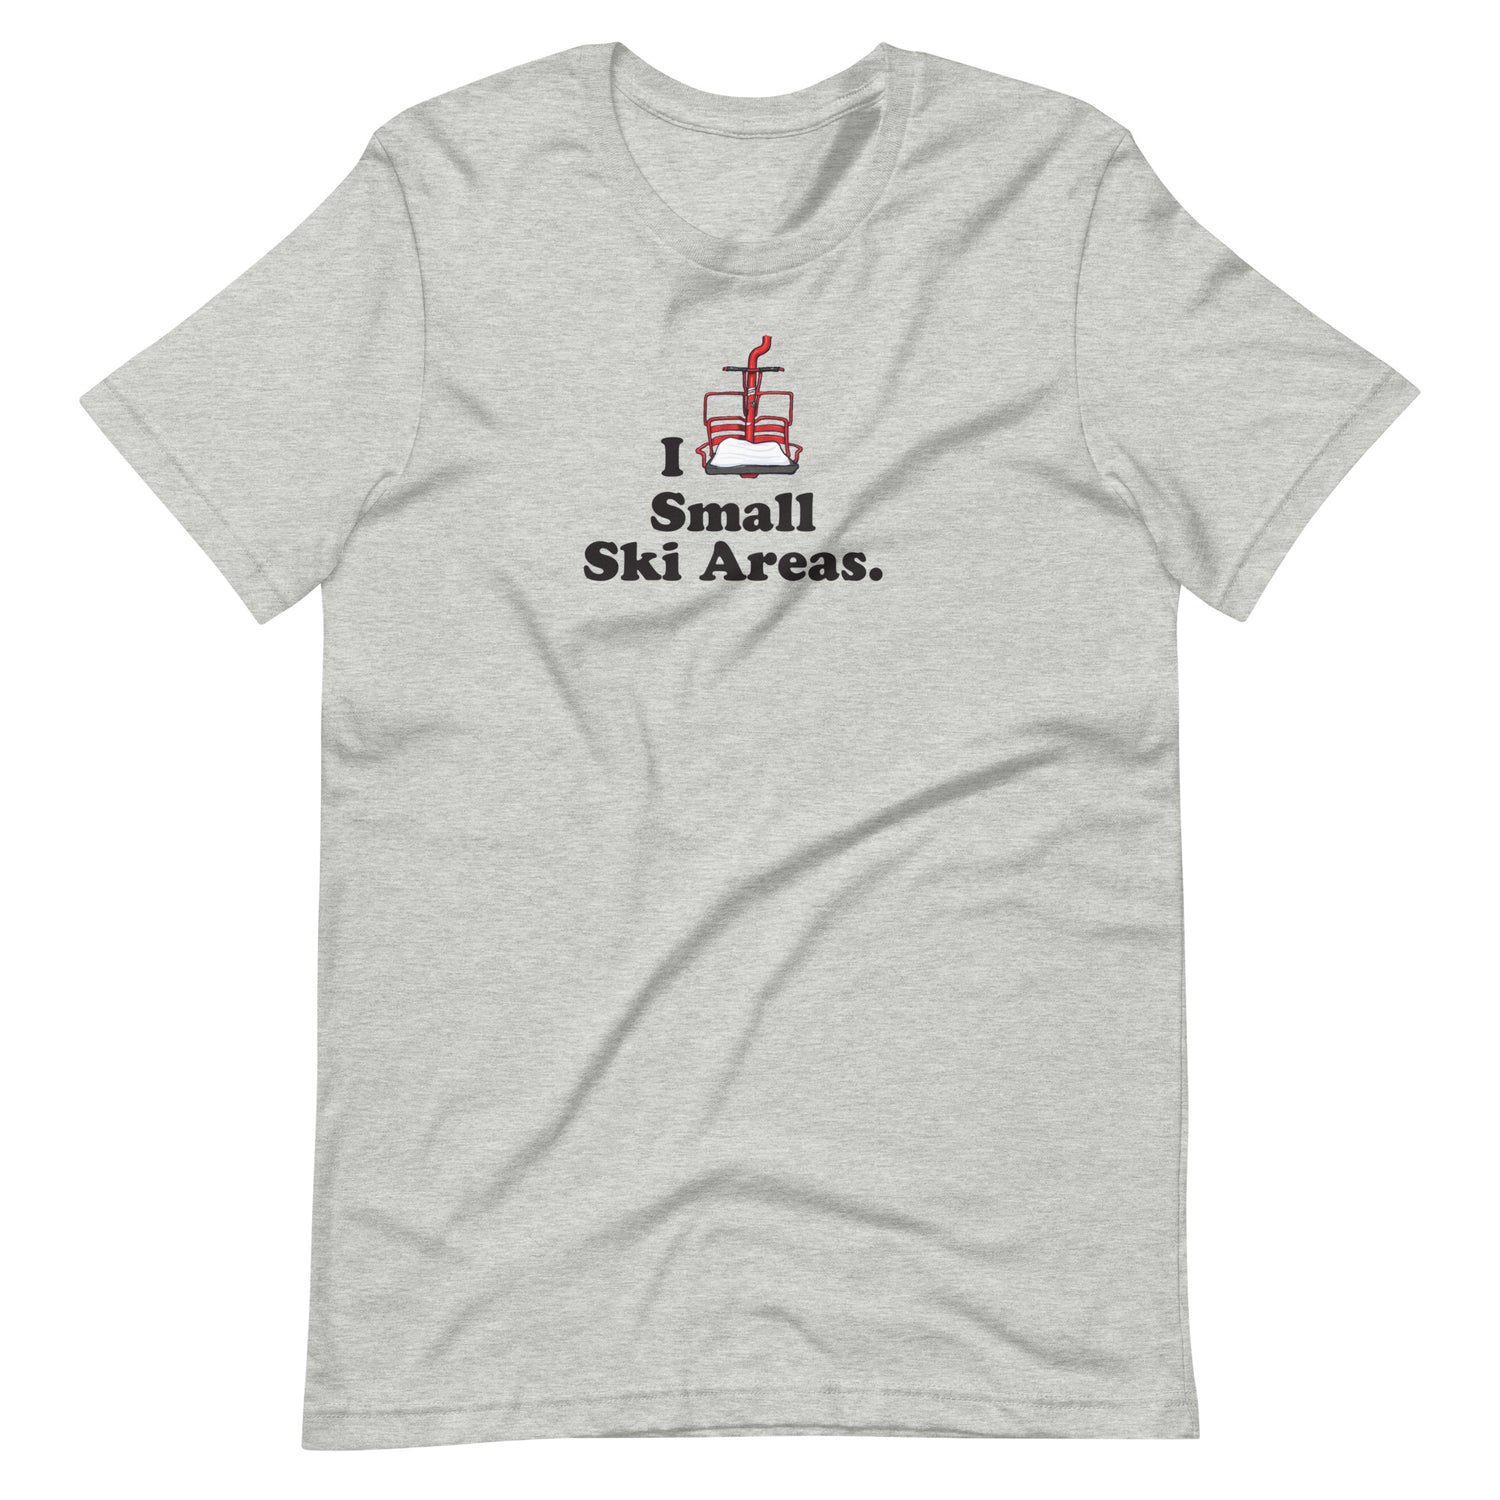 Gray Unisex Short-Sleeve Cotton T-Shirt with text I Love Small Ski Areas